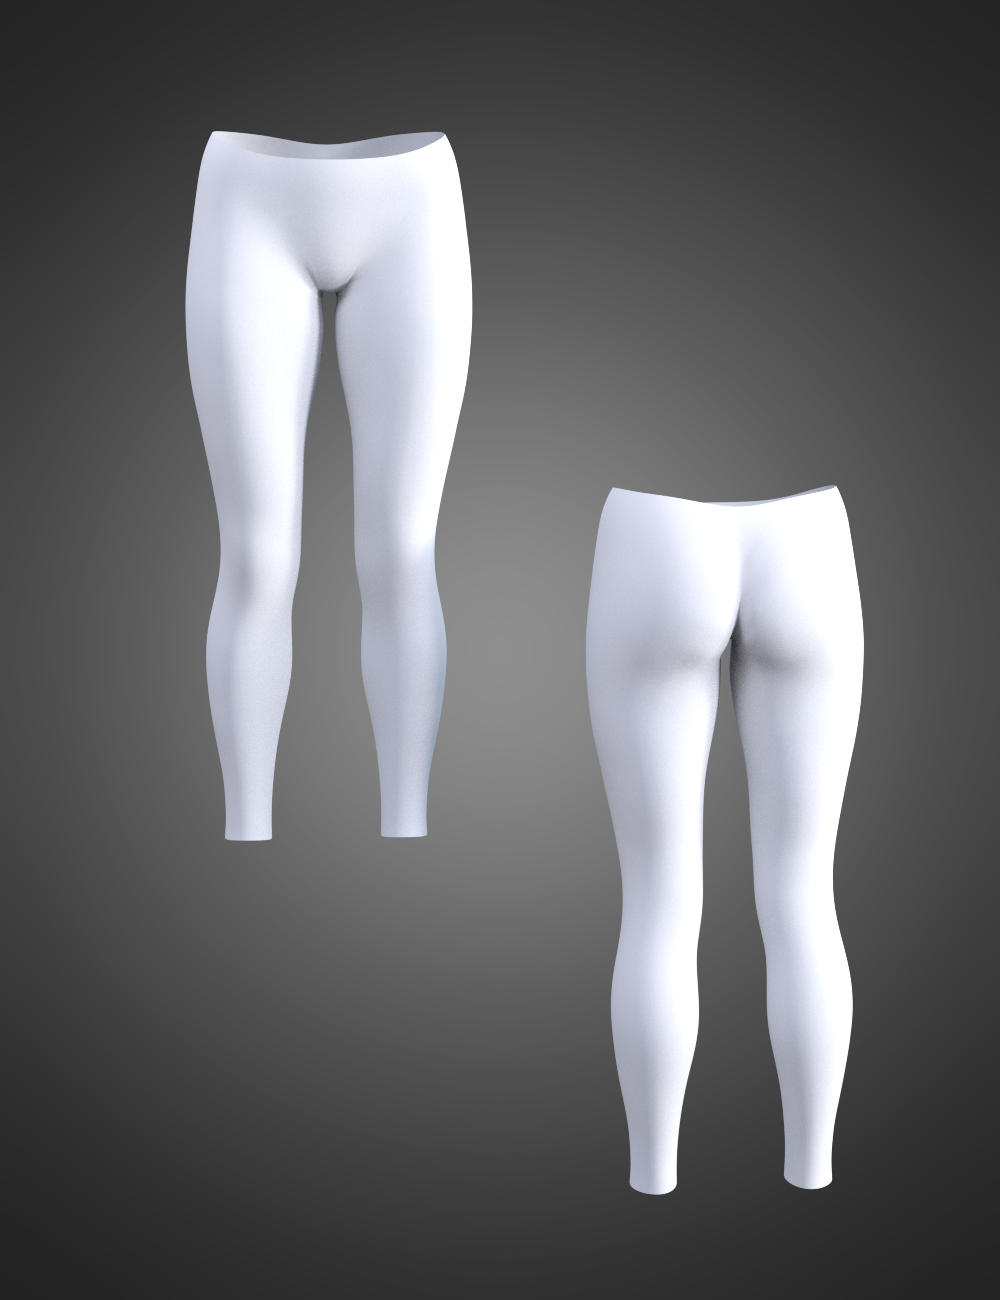 CB Luna Spell Outfit Tights for Genesis 8 and 8.1 Females by: CynderBlue, 3D Models by Daz 3D